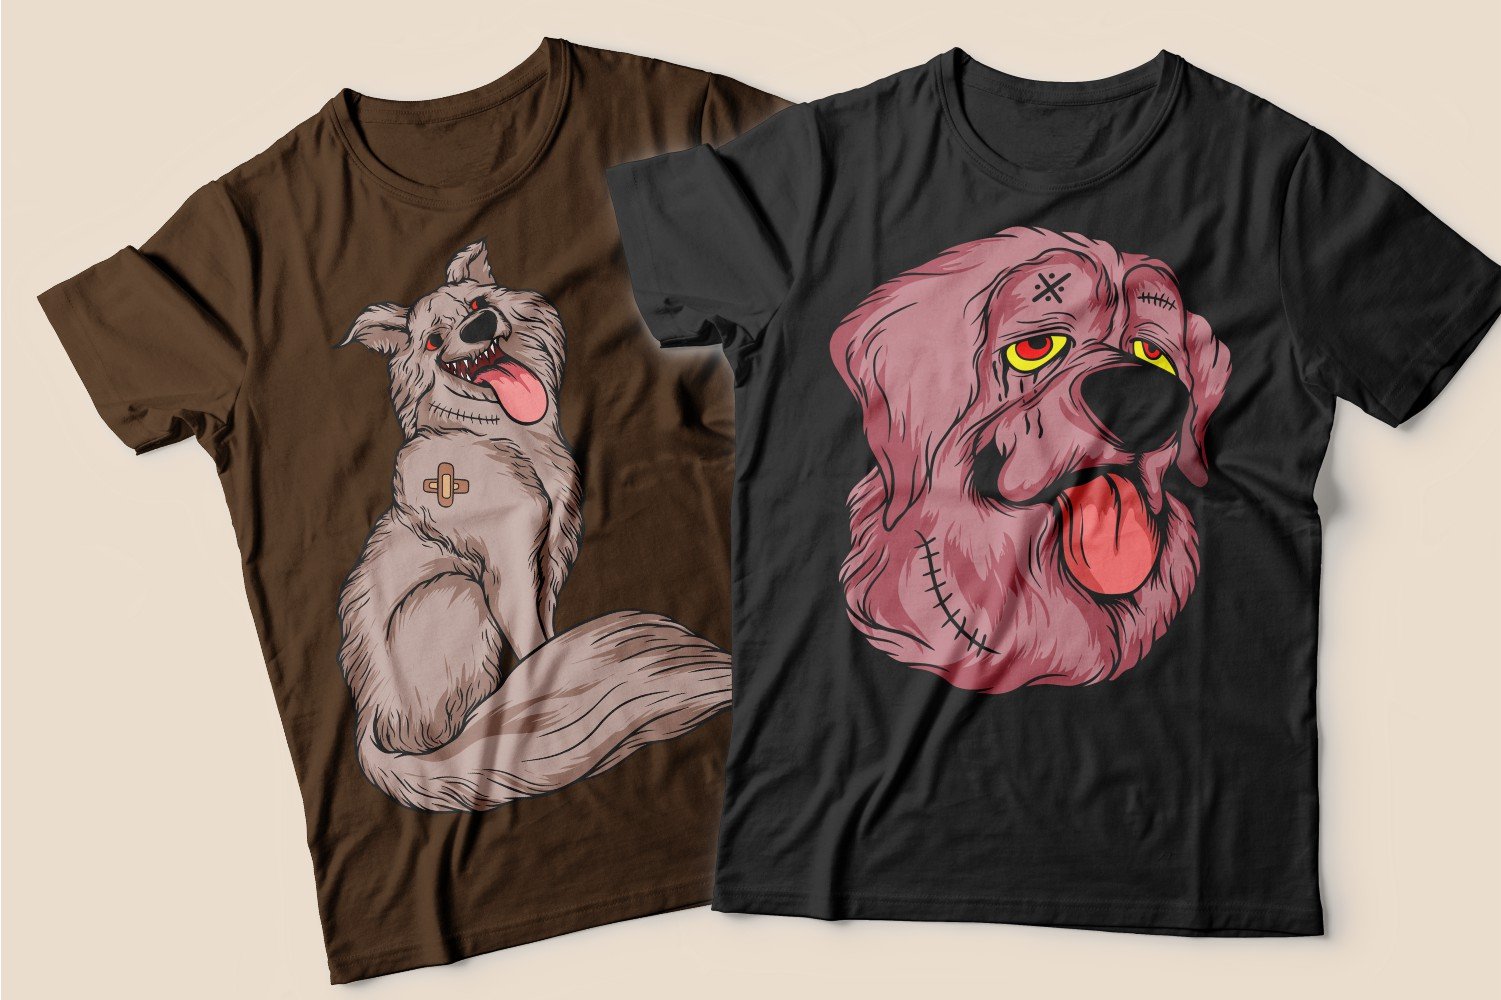 Two T-shirts: one brown with a battered but happy dog, the other black with a pink battered and tired dog.